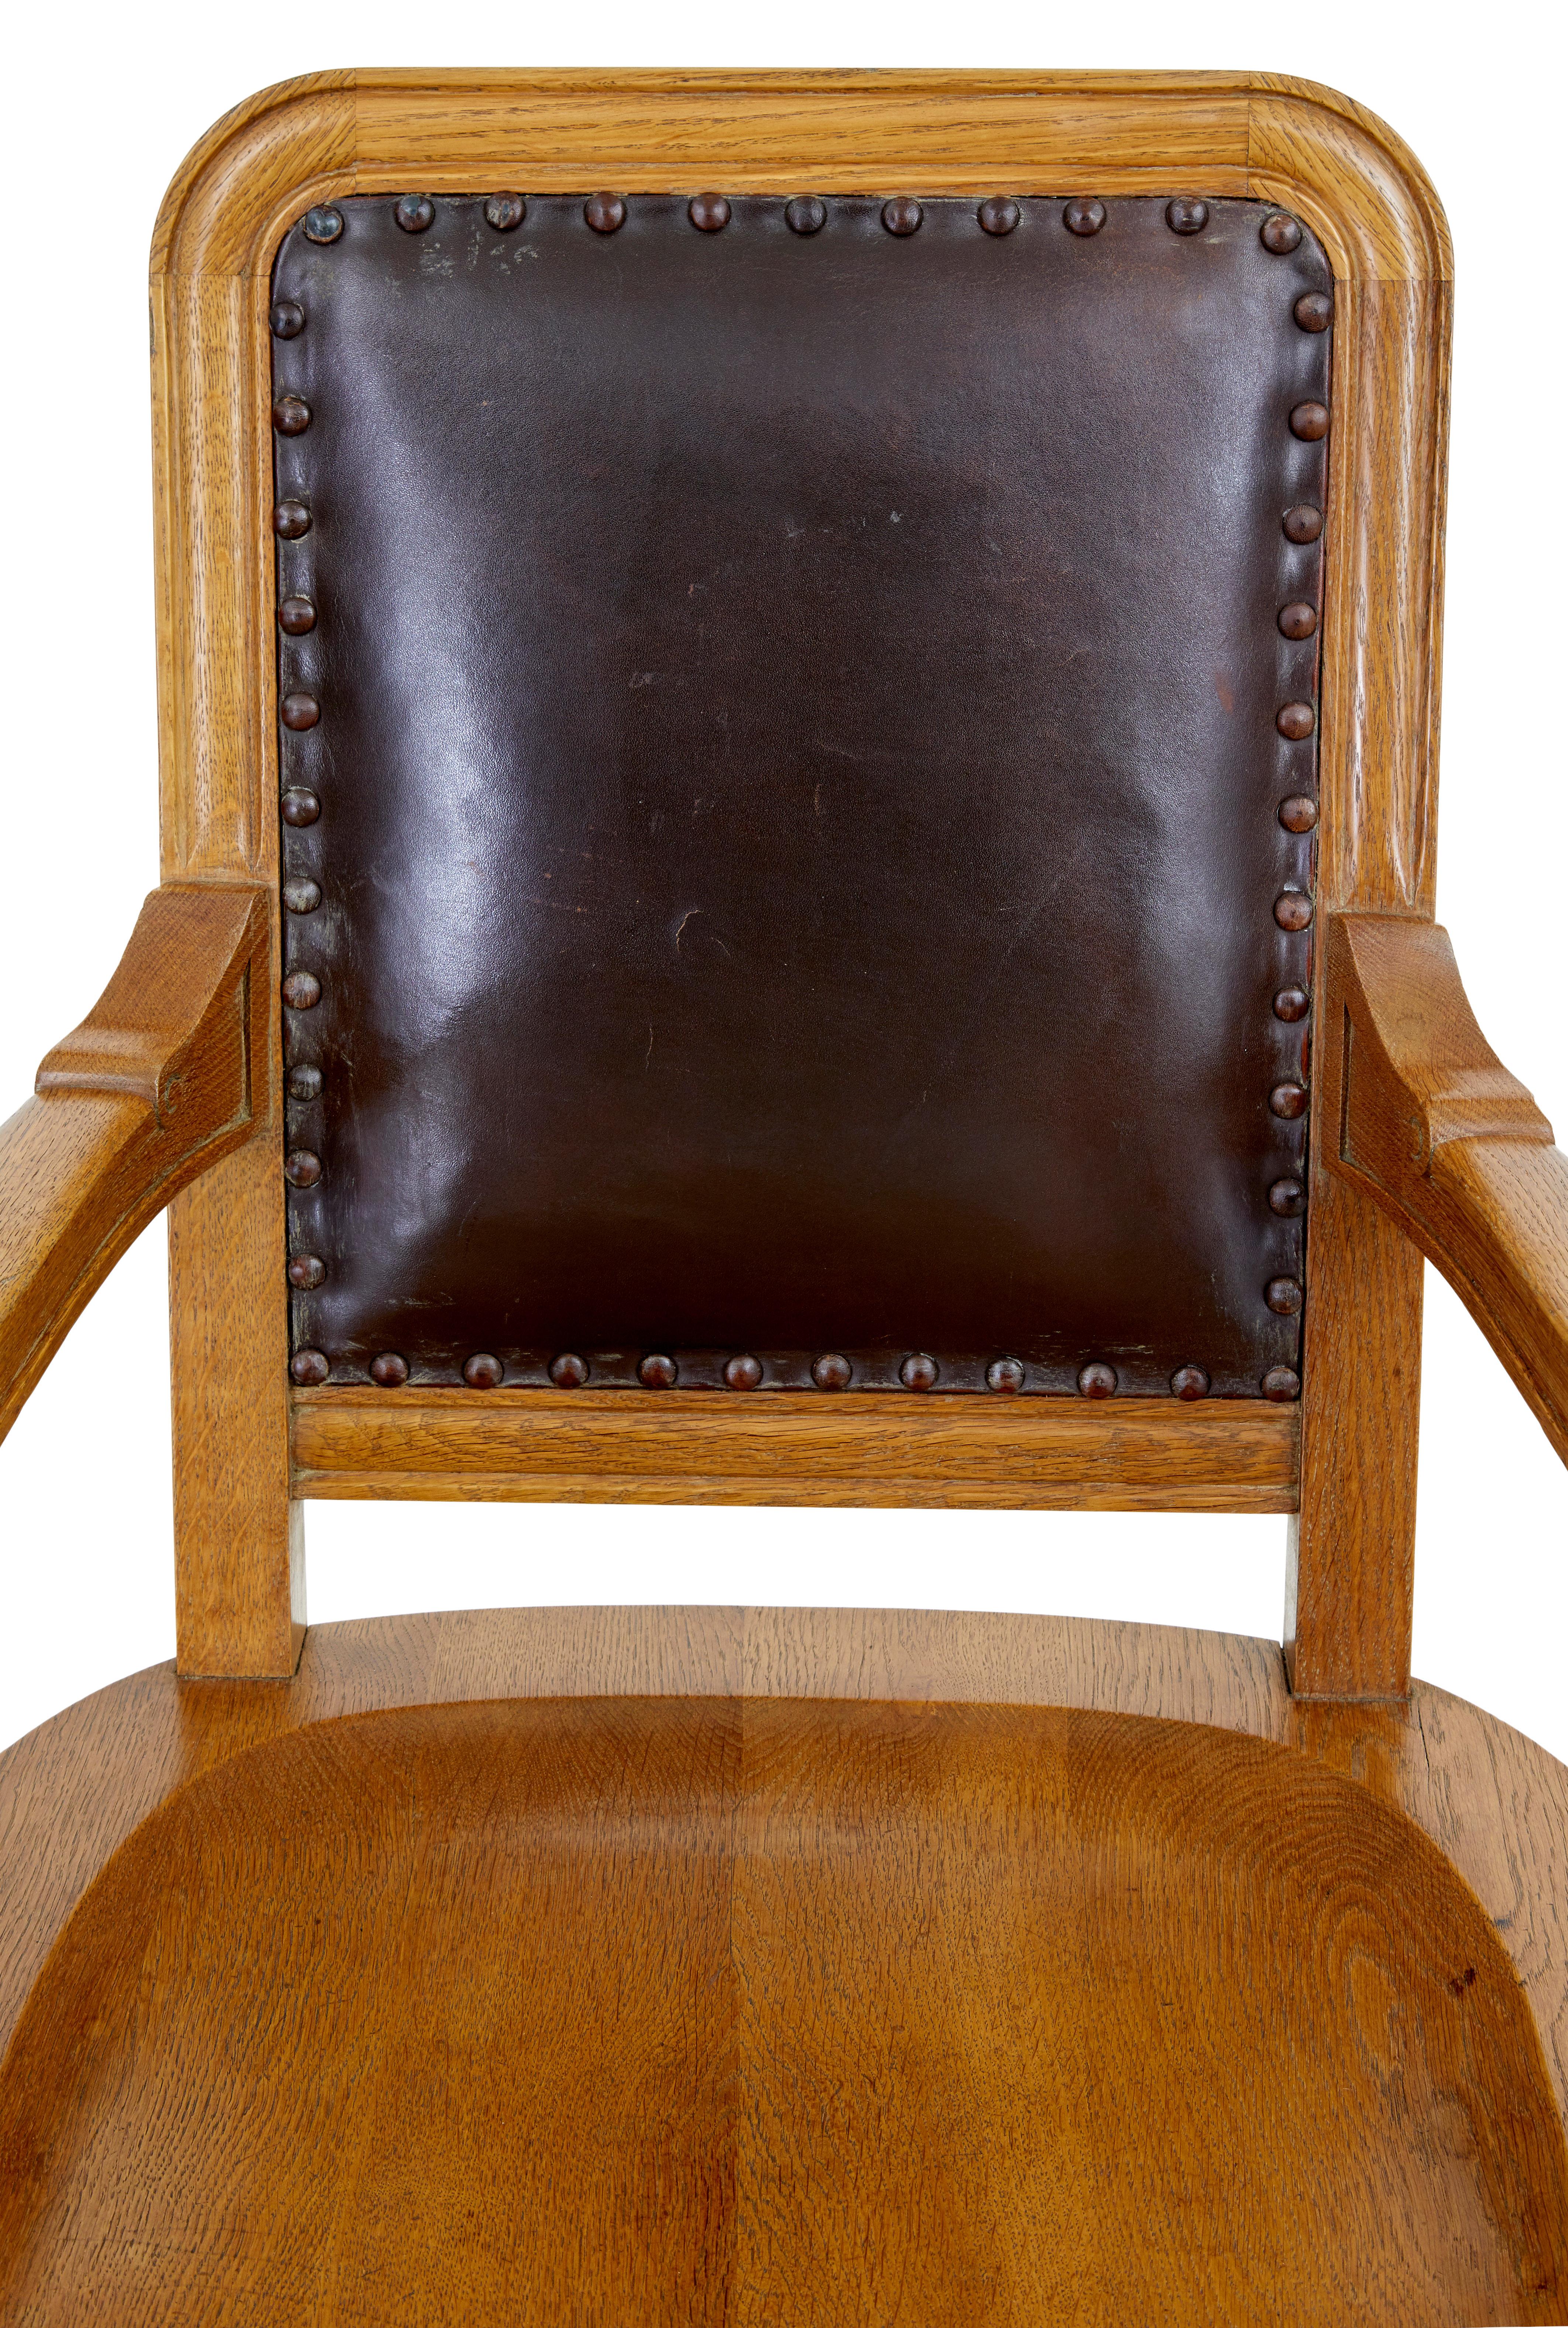 English Pair of oak and leather arts and crafts library chairs